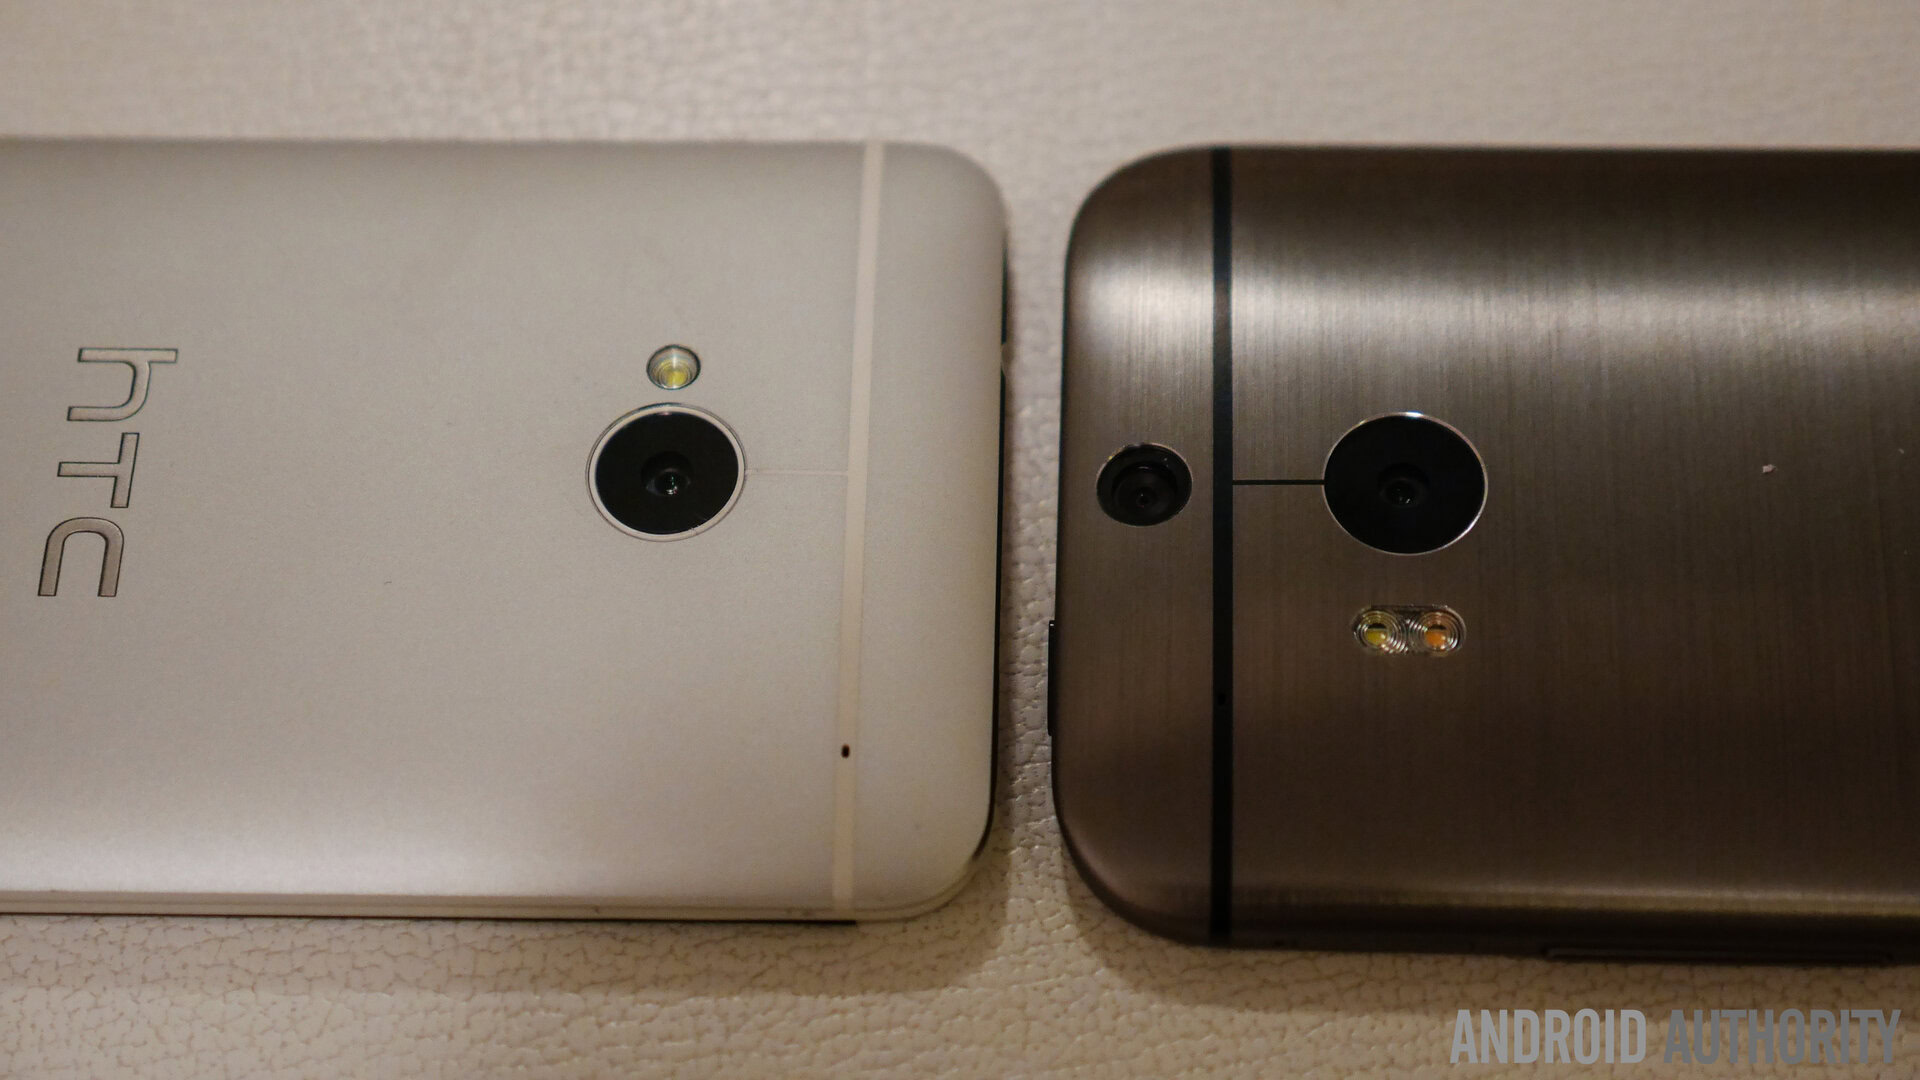 htc one m8 vs htc one m7 quick look aa (7 of 19)